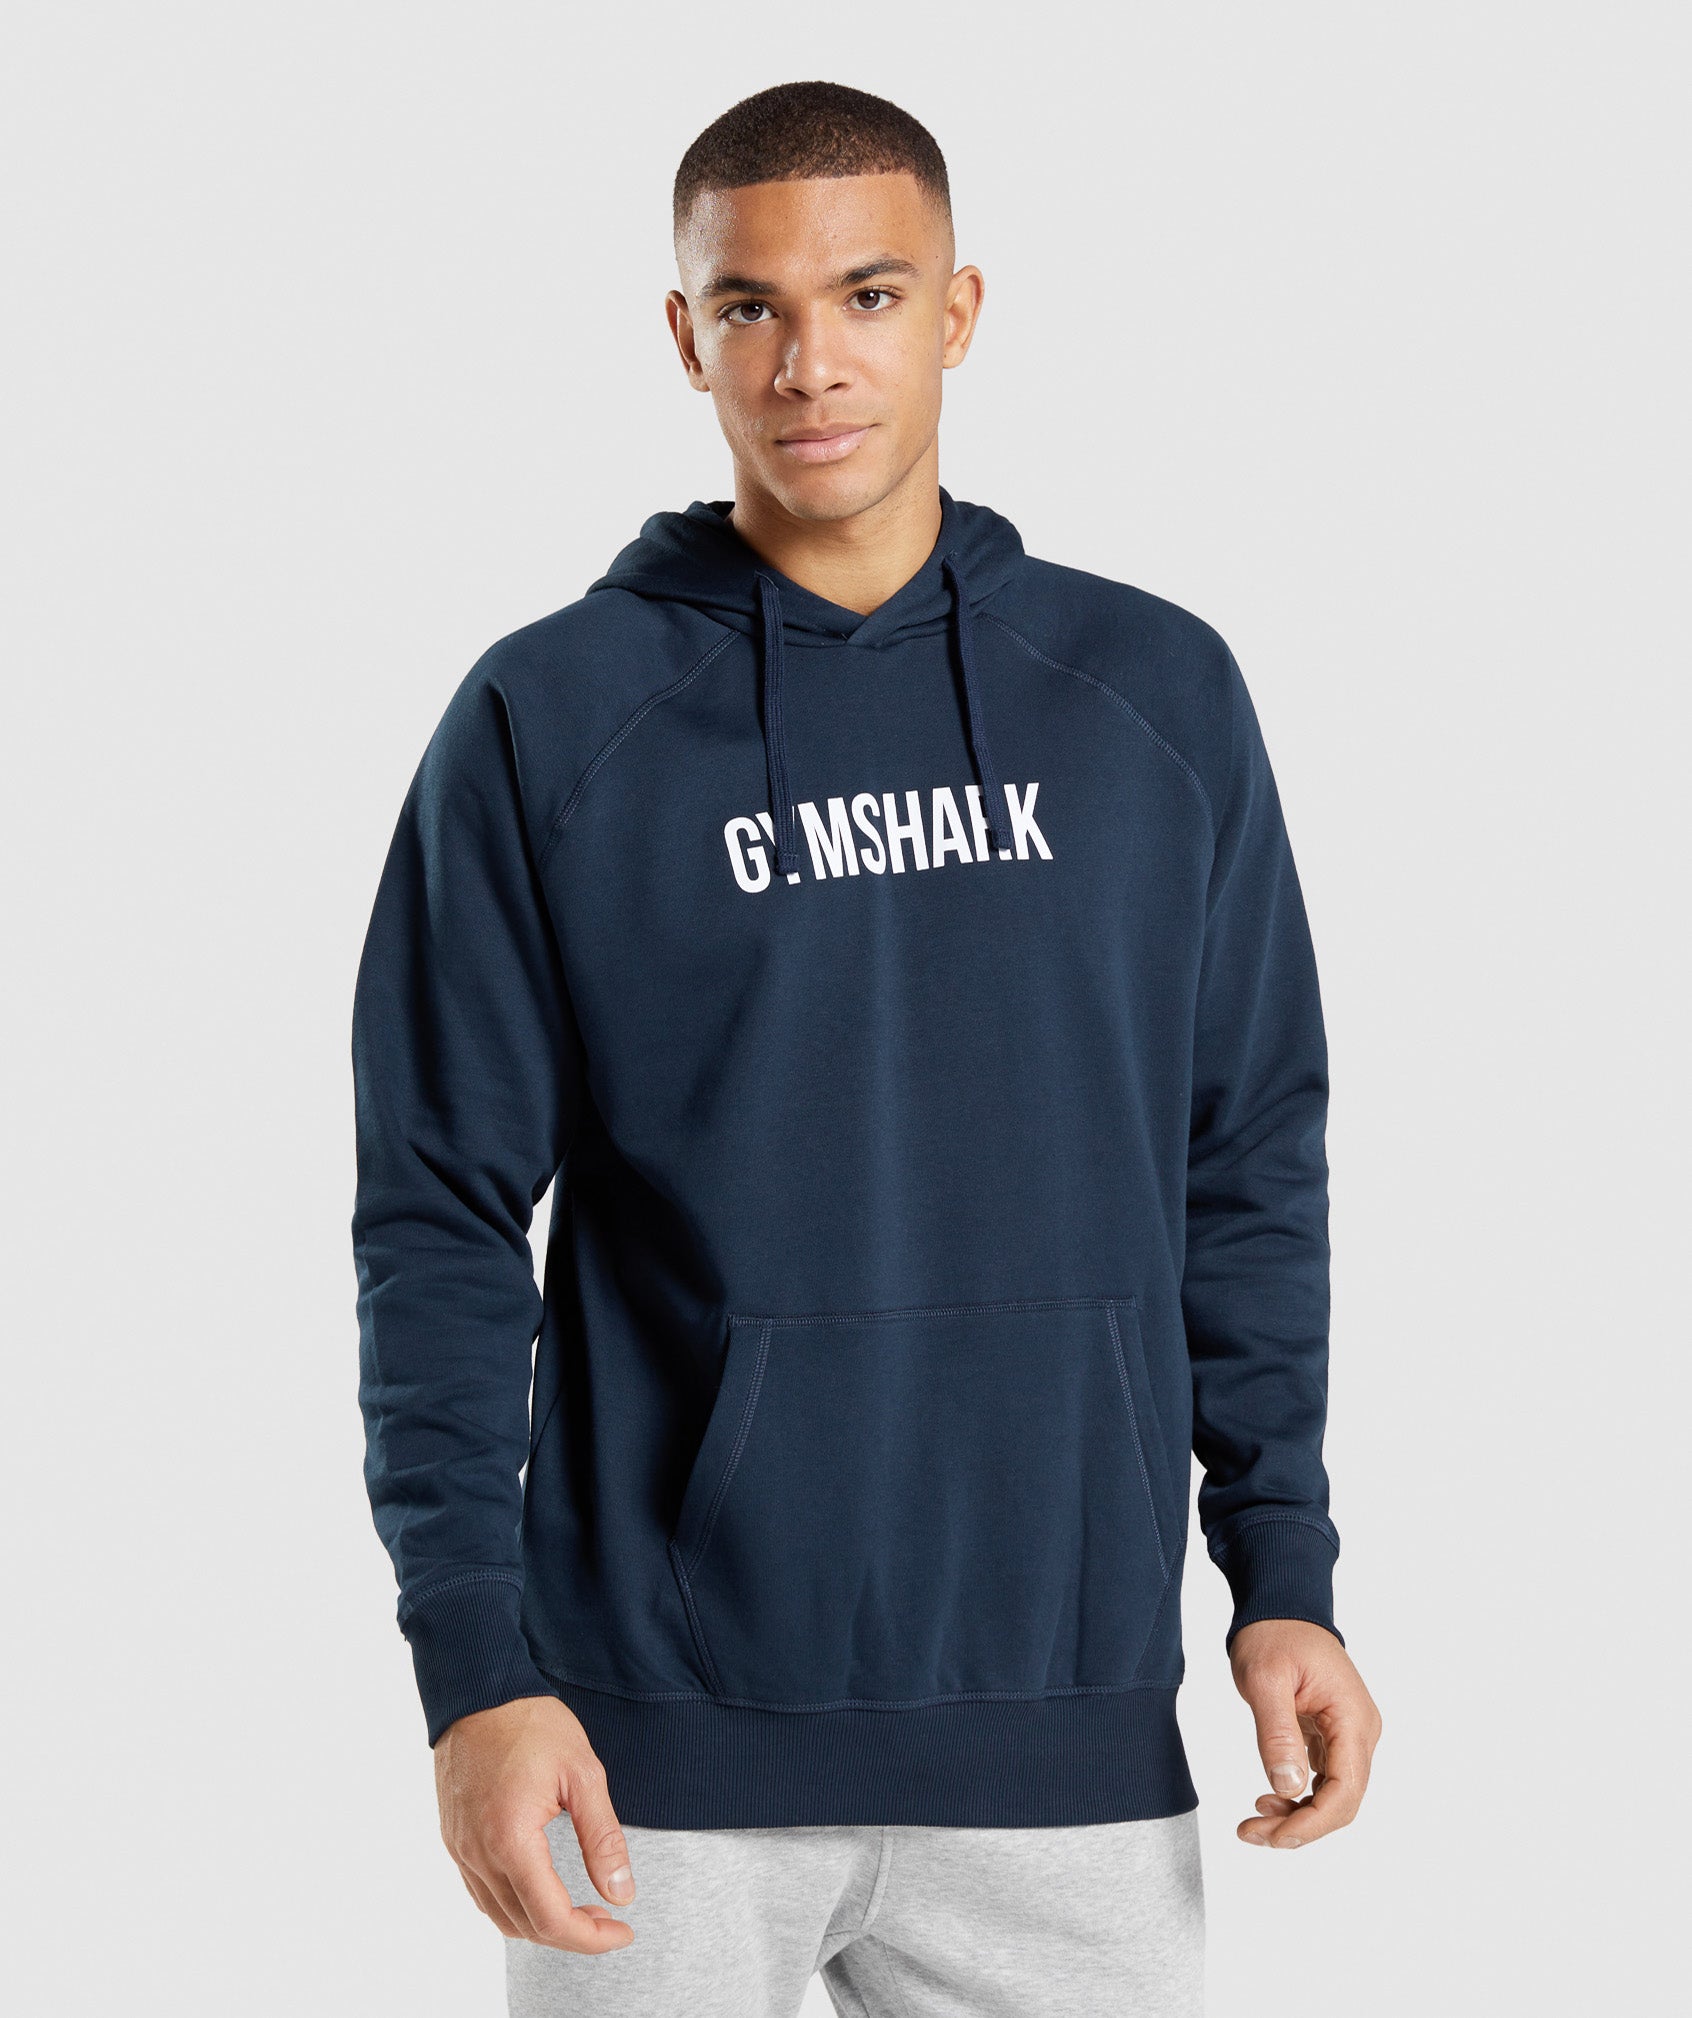 Apollo Hoodie in Navy - view 1